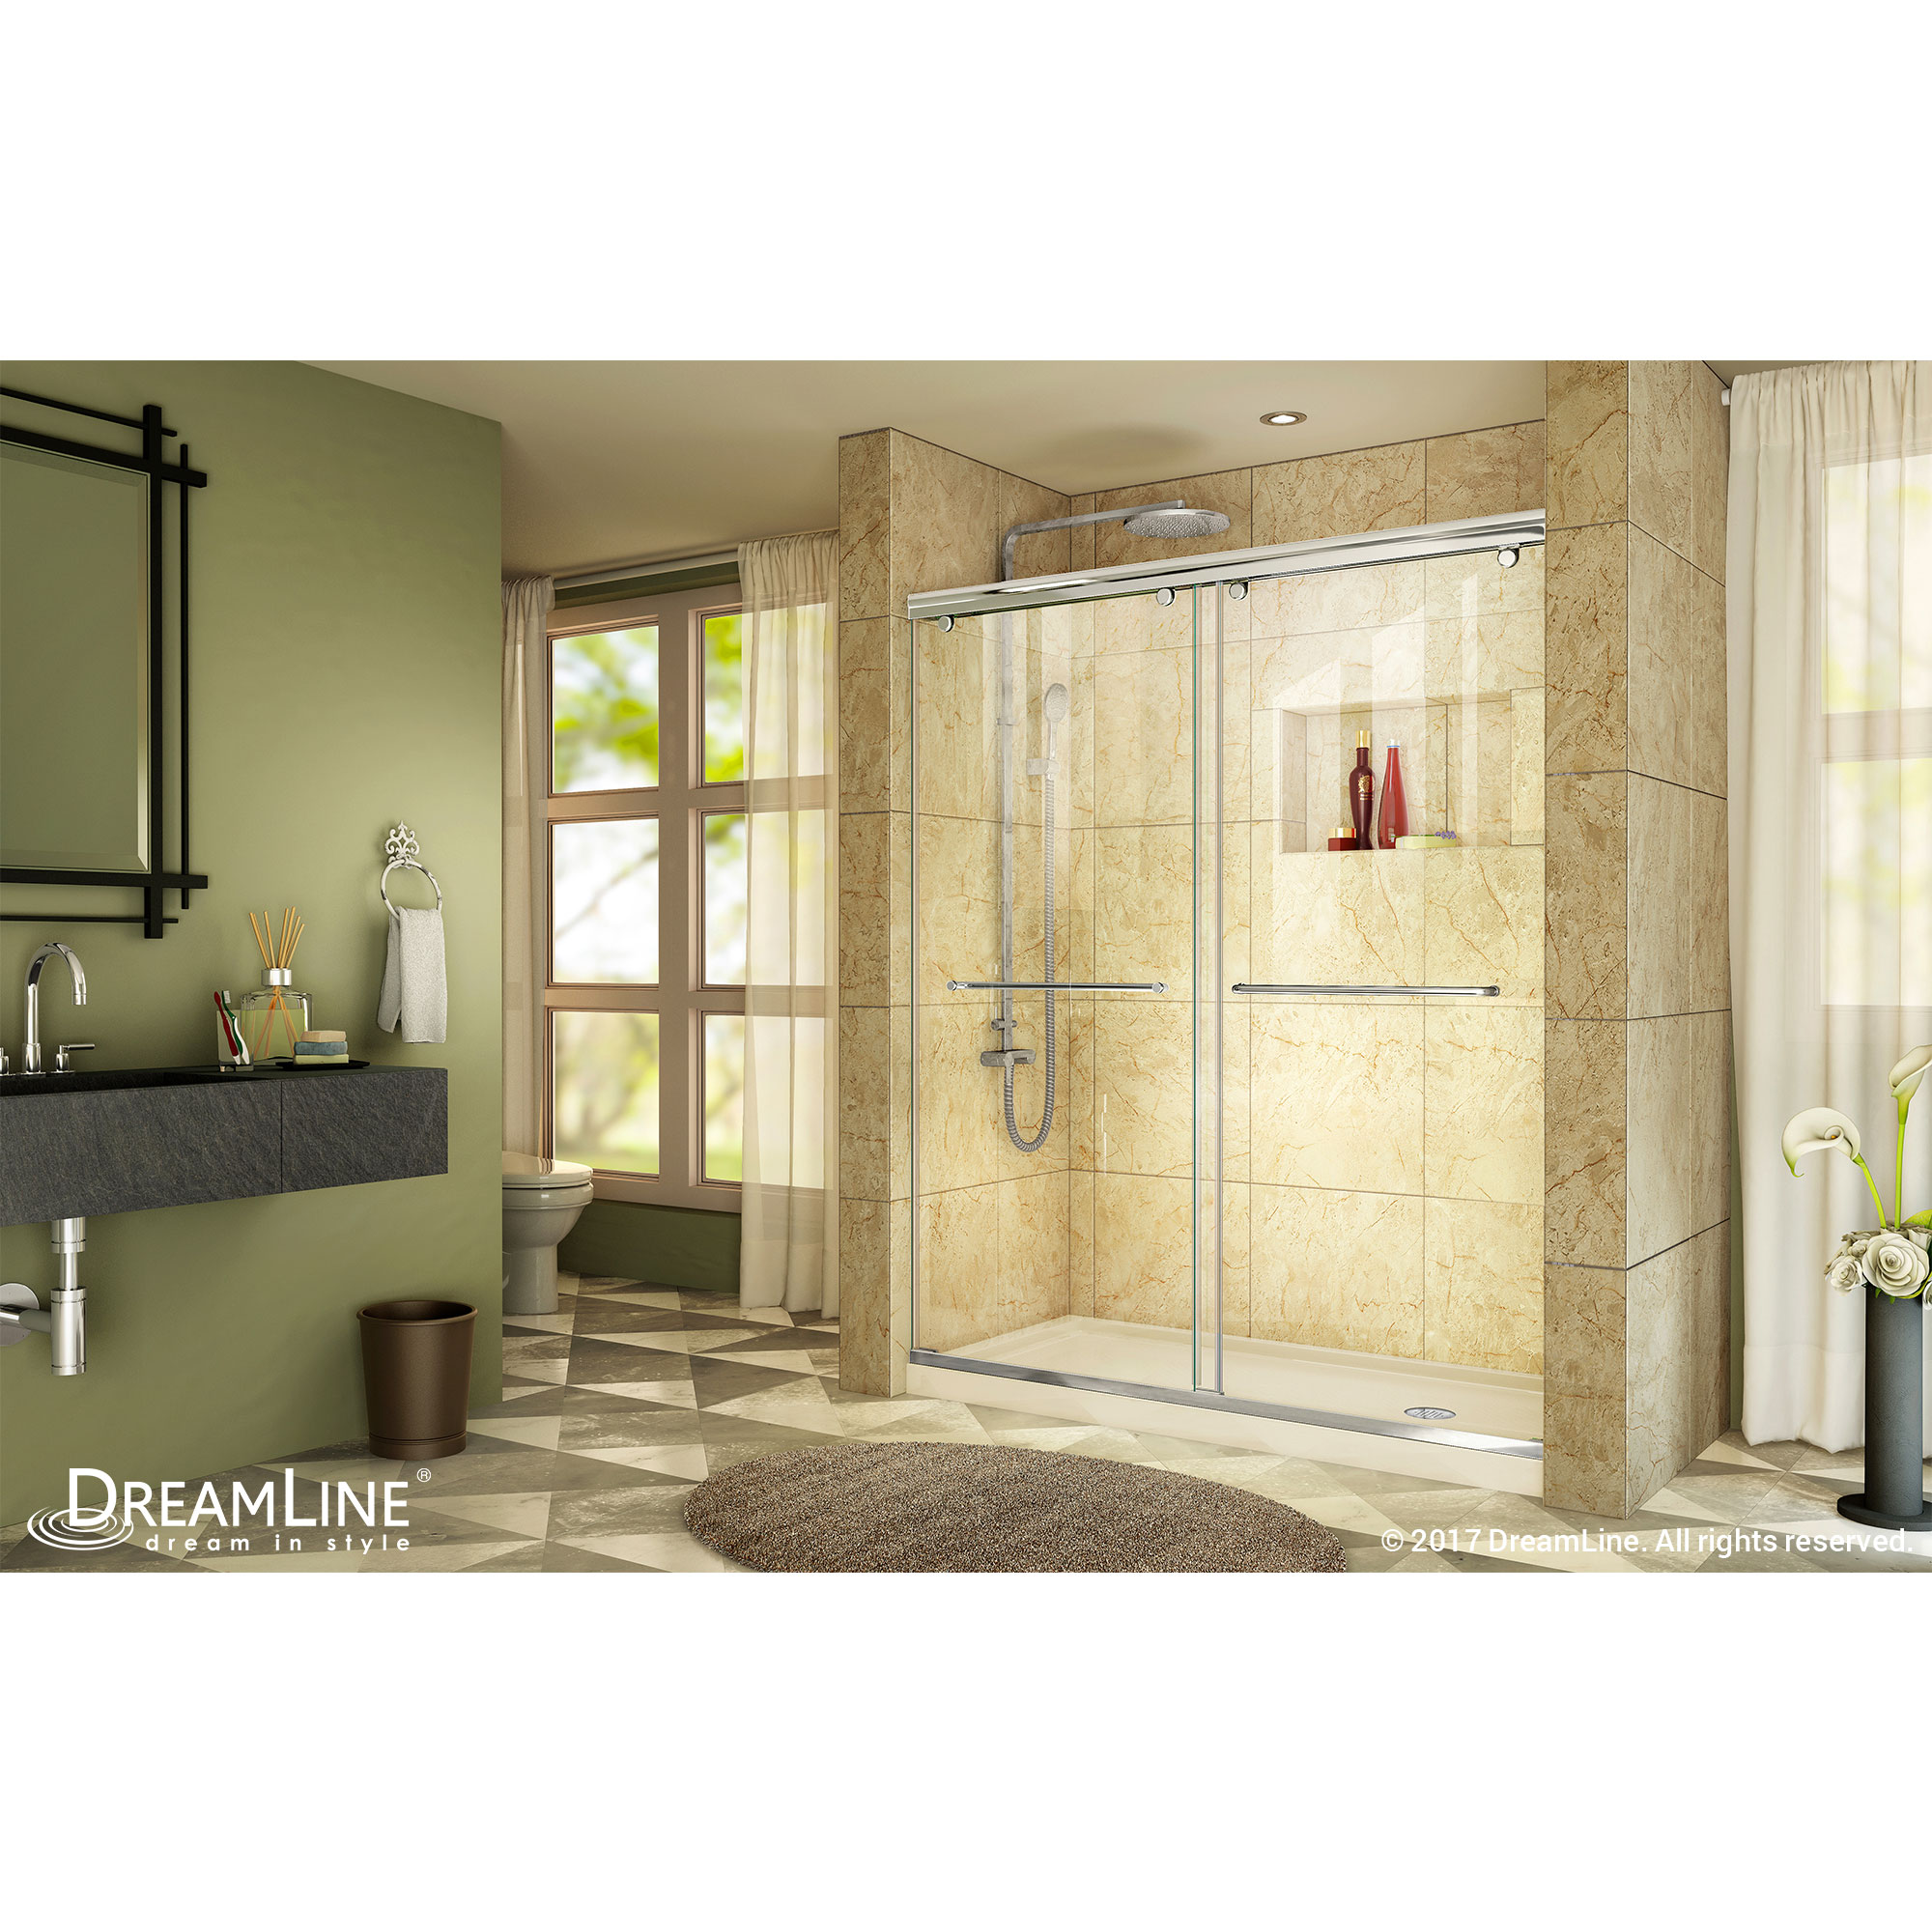 DreamLine Charisma 34 in. D x 60 in. W x 78 3/4 in. H Bypass Shower Door in Chrome with Right Drain Biscuit Base Kit